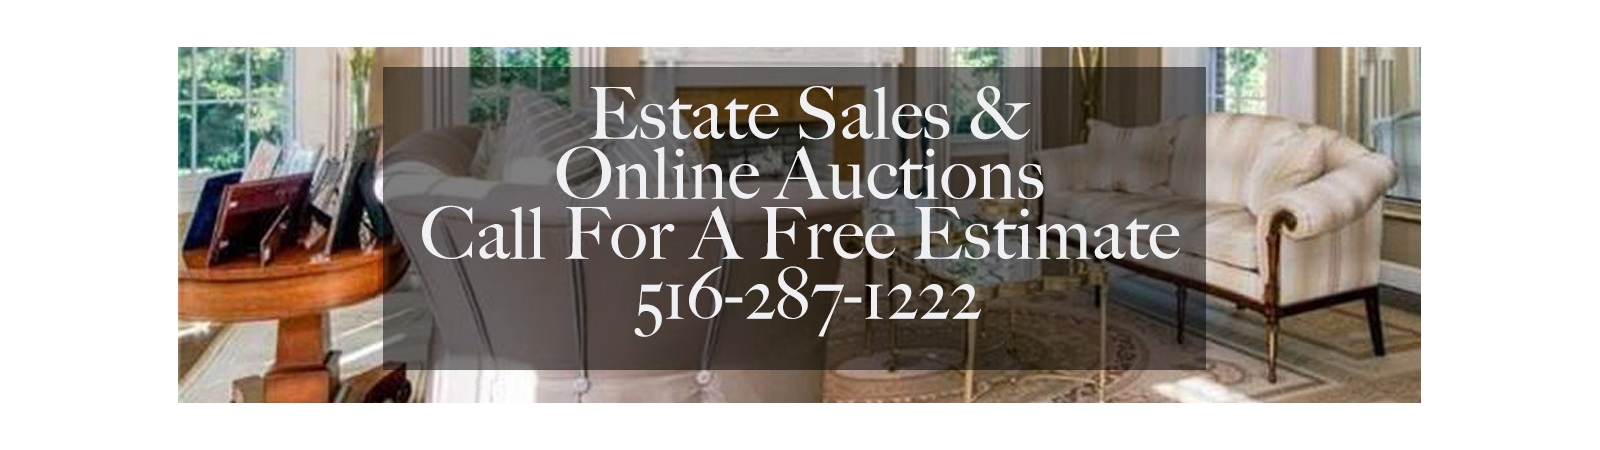 Sisters In Charge Estate Sales | AuctionNinja